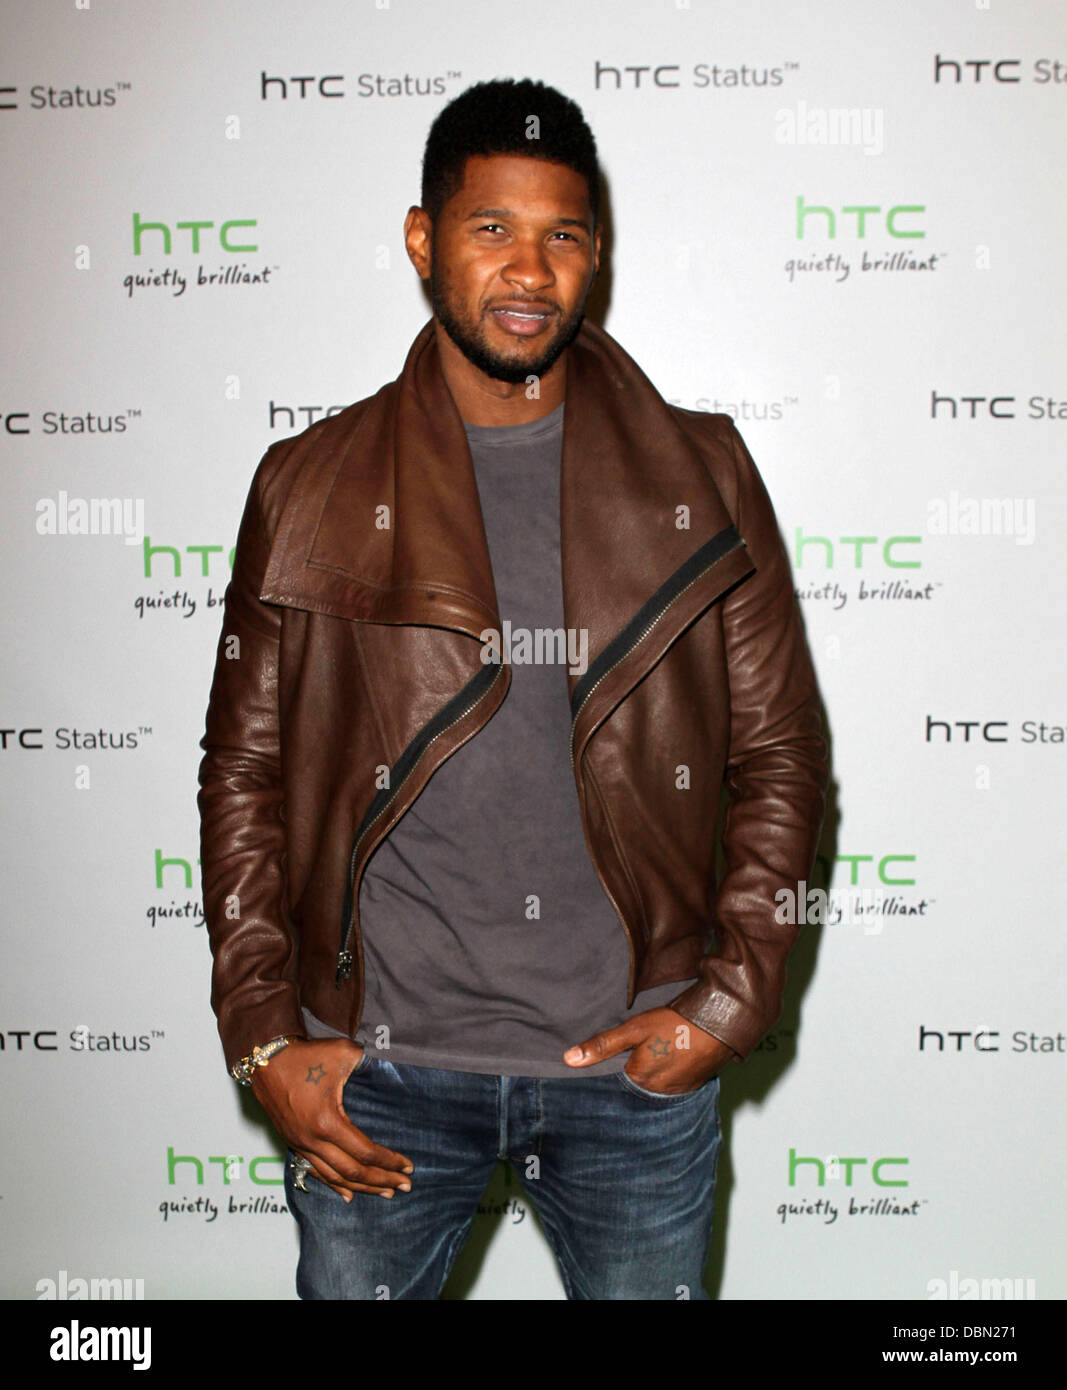 Usher The HTC Status Social launch event held at Paramount Studios - Arrivals Los Angeles, California - 19.07.11 Stock Photo